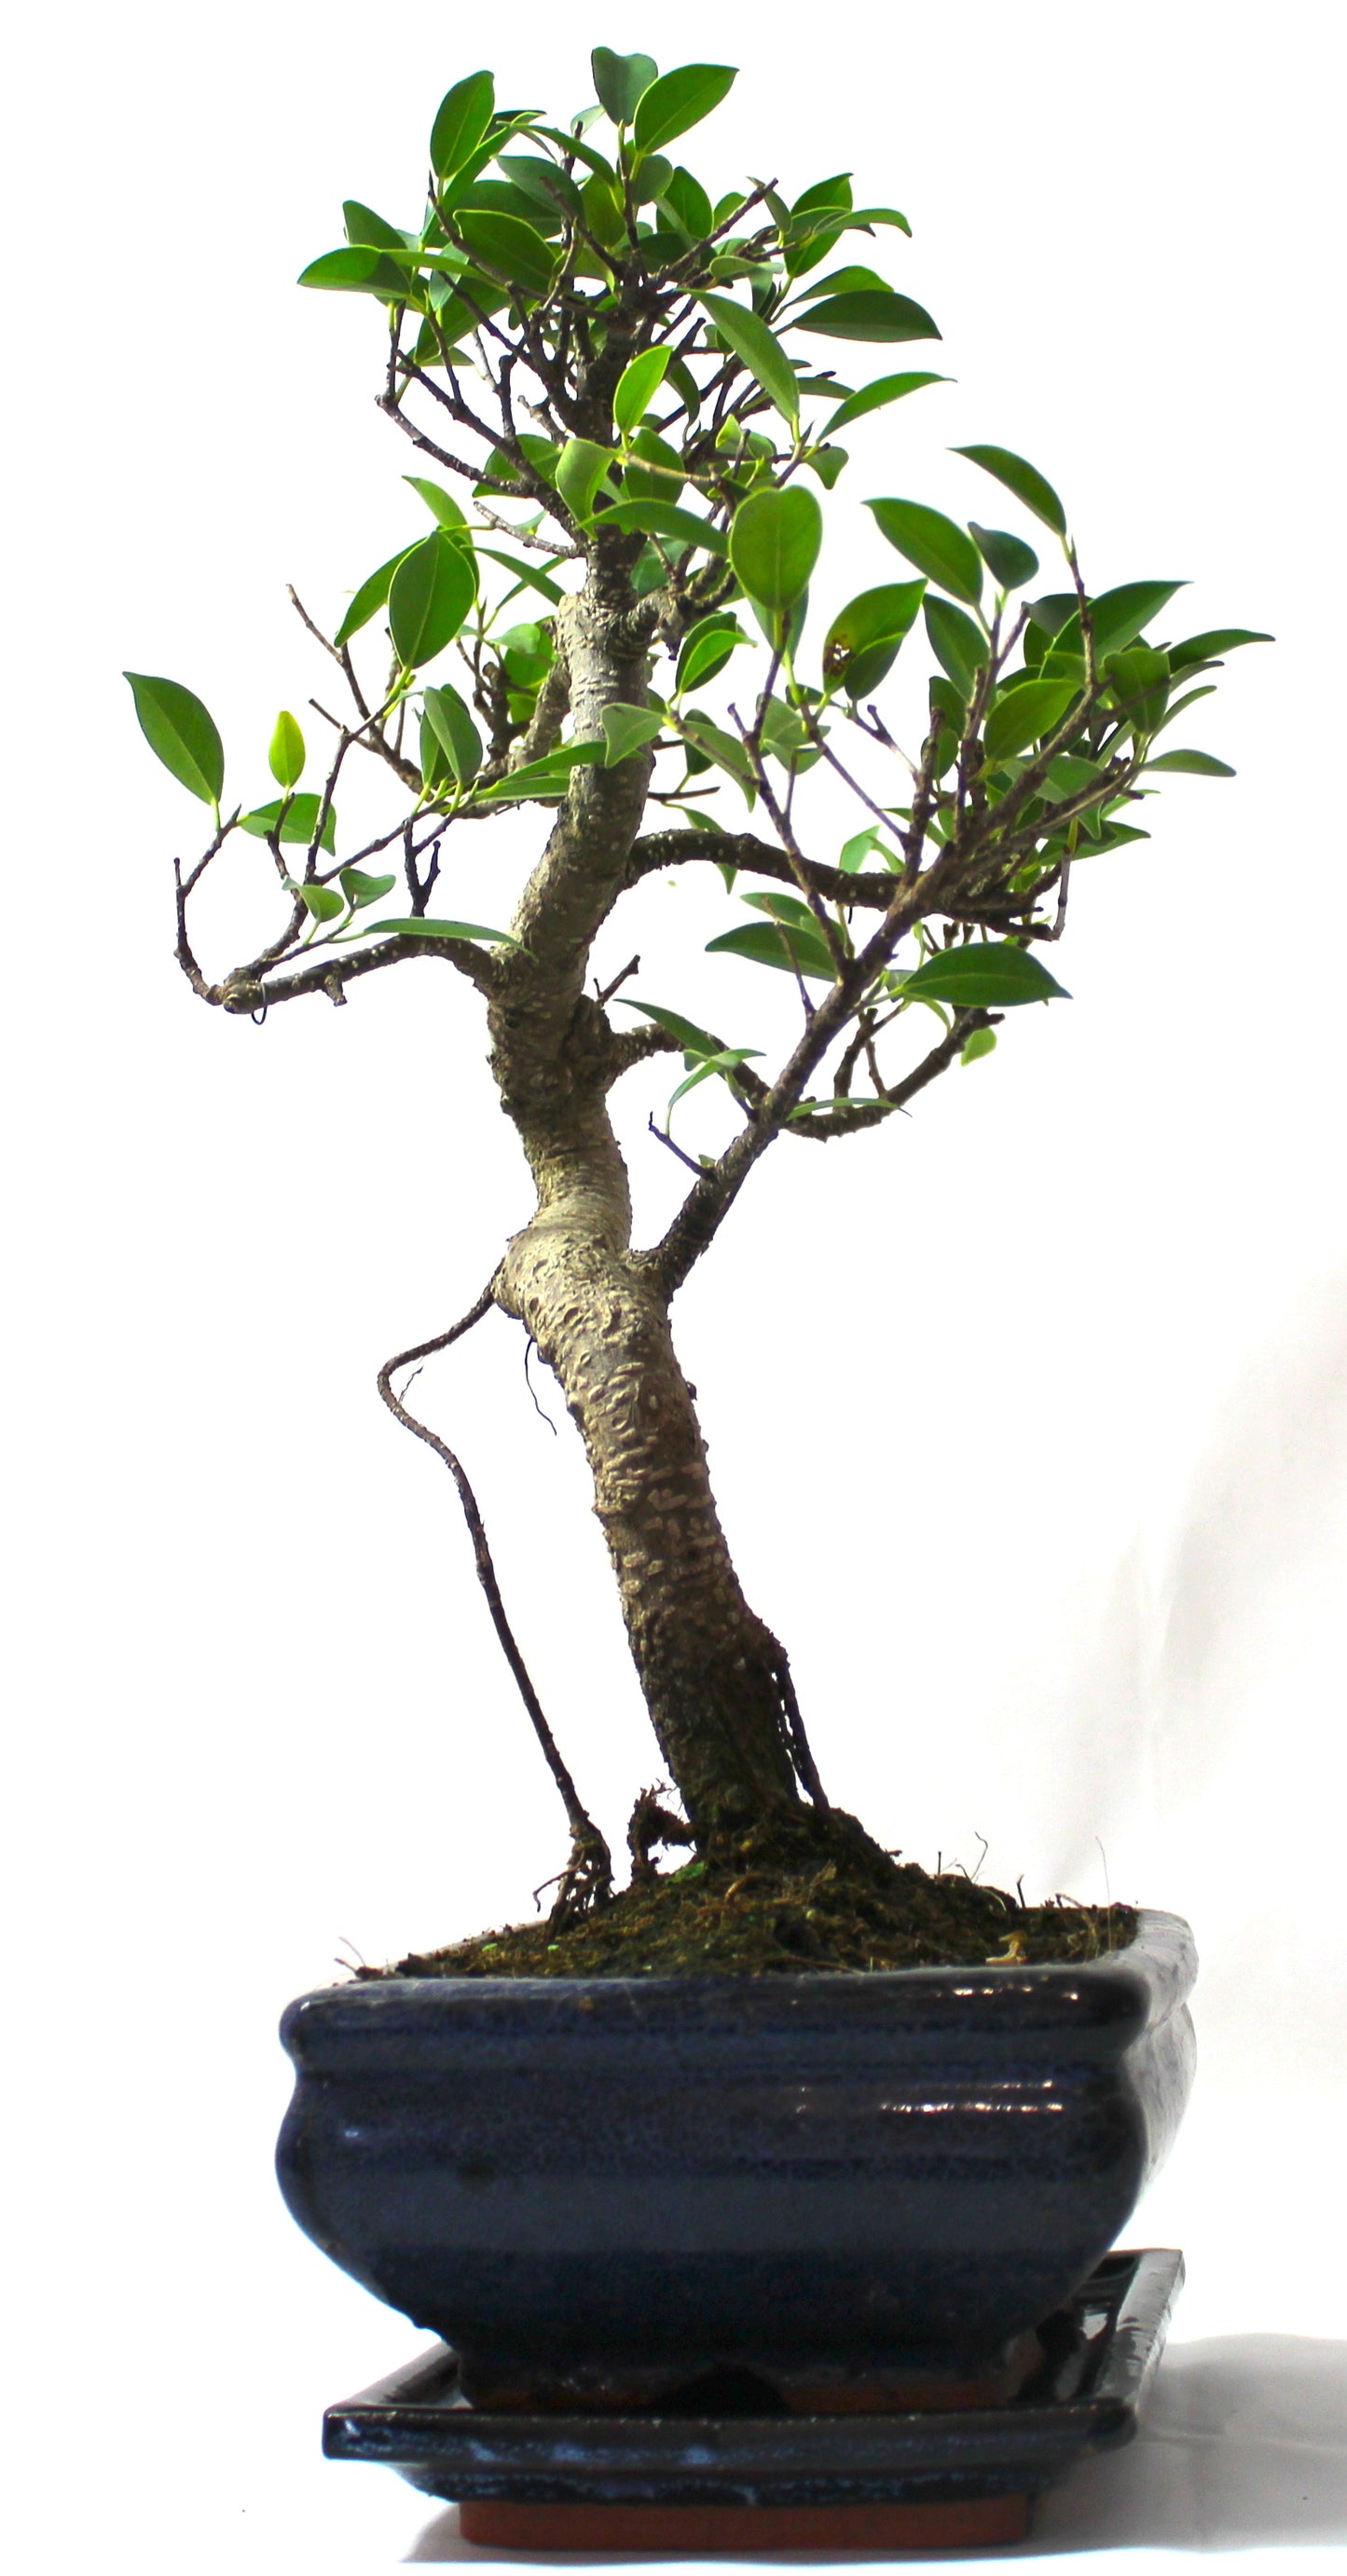 Large Ficus Retusa (Fig) Bonsai Tree S trunk - supplied with Care set and drip tray